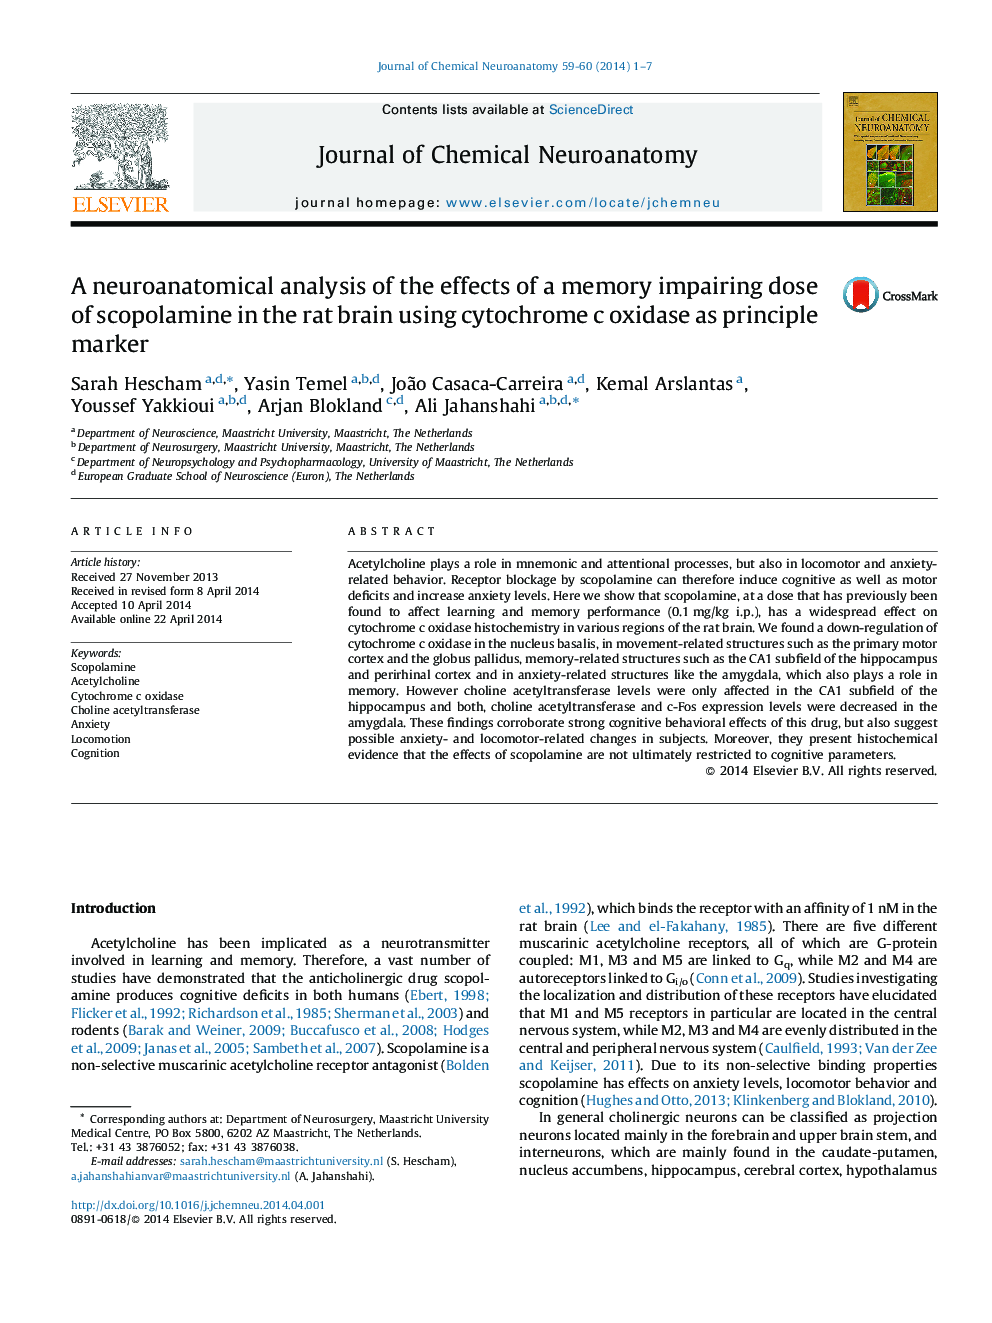 A neuroanatomical analysis of the effects of a memory impairing dose of scopolamine in the rat brain using cytochrome c oxidase as principle marker